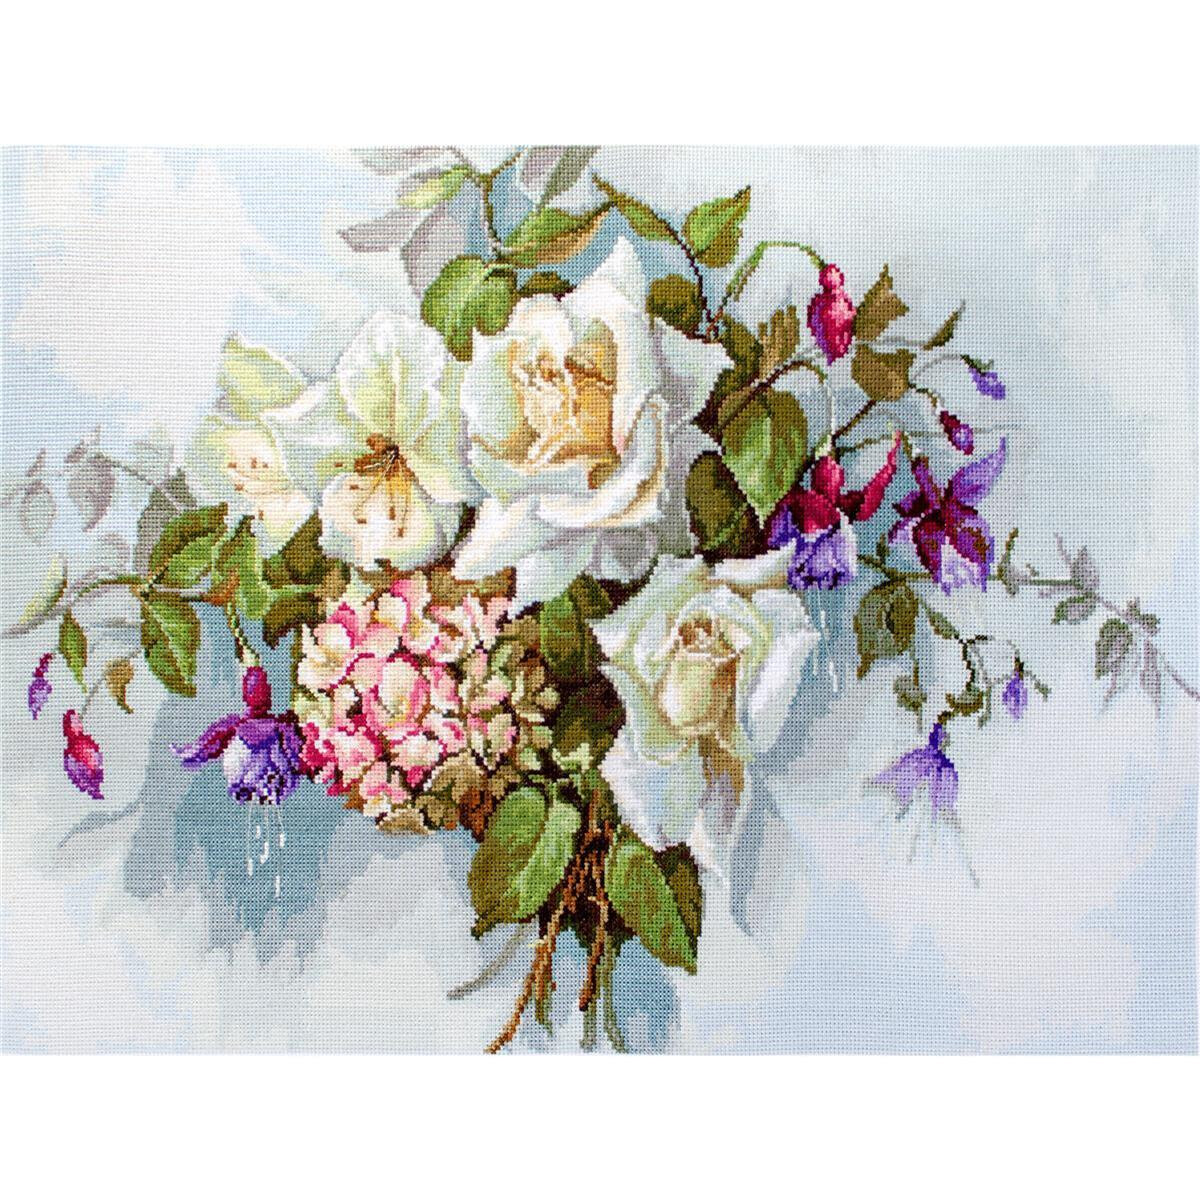 A detailed floral arrangement consists of white roses,...